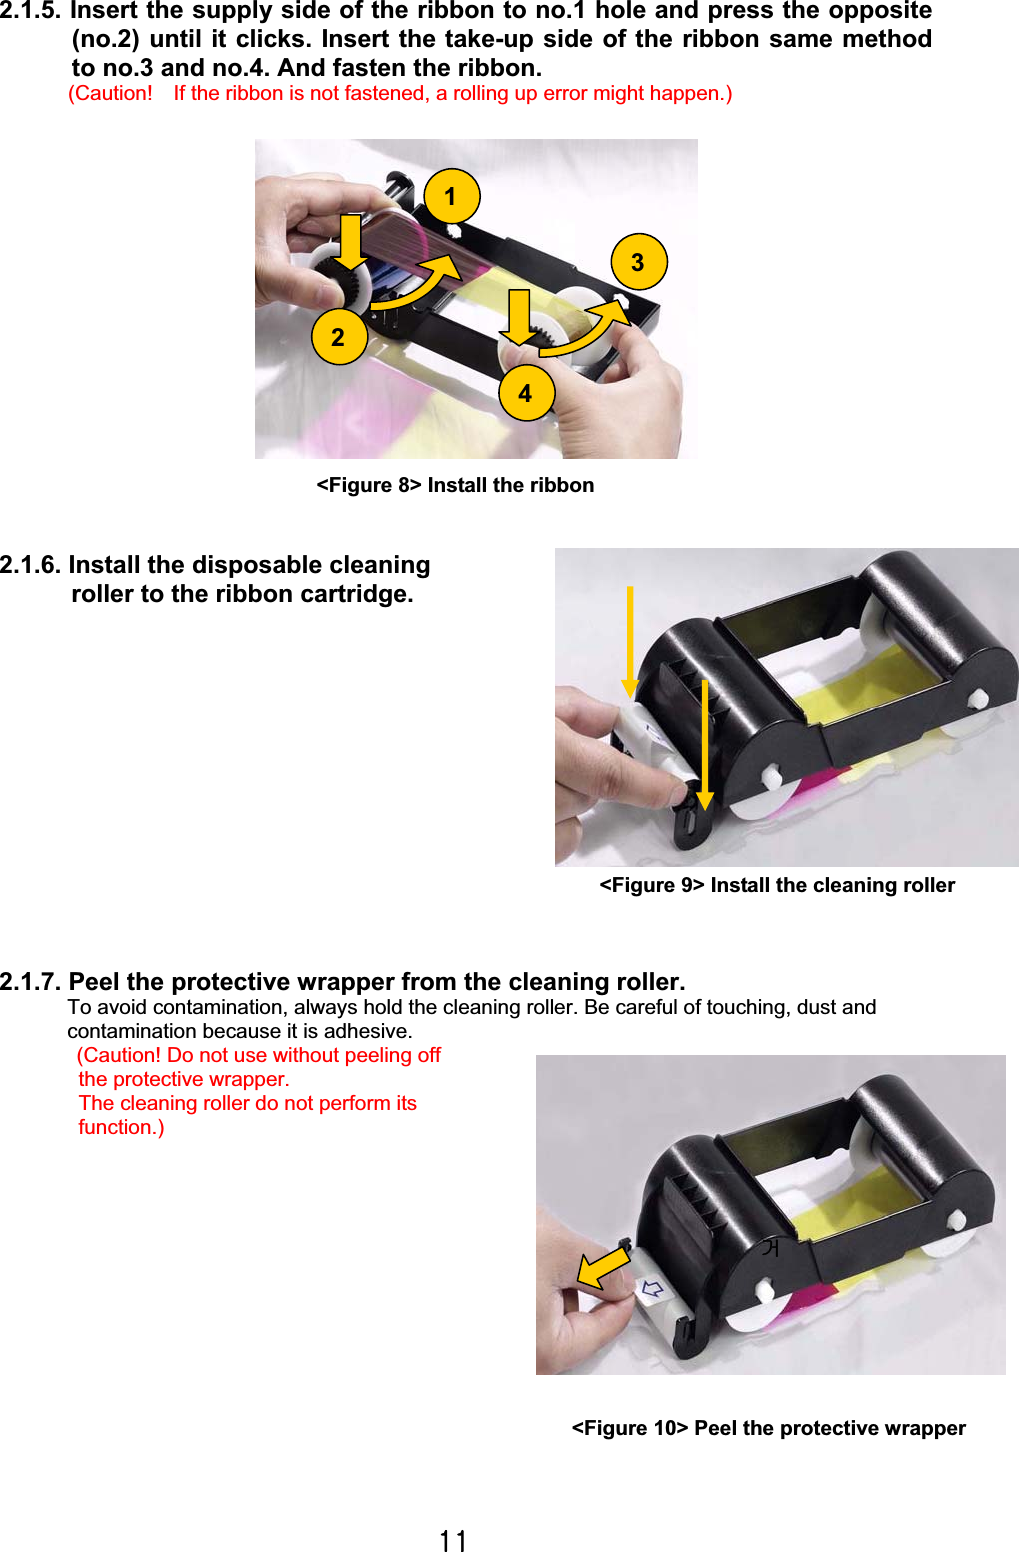 XXG2.1.5. Insert the supply side of the ribbon to no.1 hole and press the opposite (no.2) until it clicks. Insert the take-up side of the ribbon same method to no.3 and no.4. And fasten the ribbon. (Caution!    If the ribbon is not fastened, a rolling up error might happen.)        2.1.6. Install the disposable cleaning roller to the ribbon cartridge.   2.1.7. Peel the protective wrapper from the cleaning roller. To avoid contamination, always hold the cleaning roller. Be careful of touching, dust and   contamination because it is adhesive. (Caution! Do not use without peeling off   the protective wrapper.   The cleaning roller do not perform its function.)ᶤ&lt;Figure 8&gt; Install the ribbon &lt;Figure 10&gt; Peel the protective wrapper 1234&lt;Figure 9&gt; Install the cleaning roller 